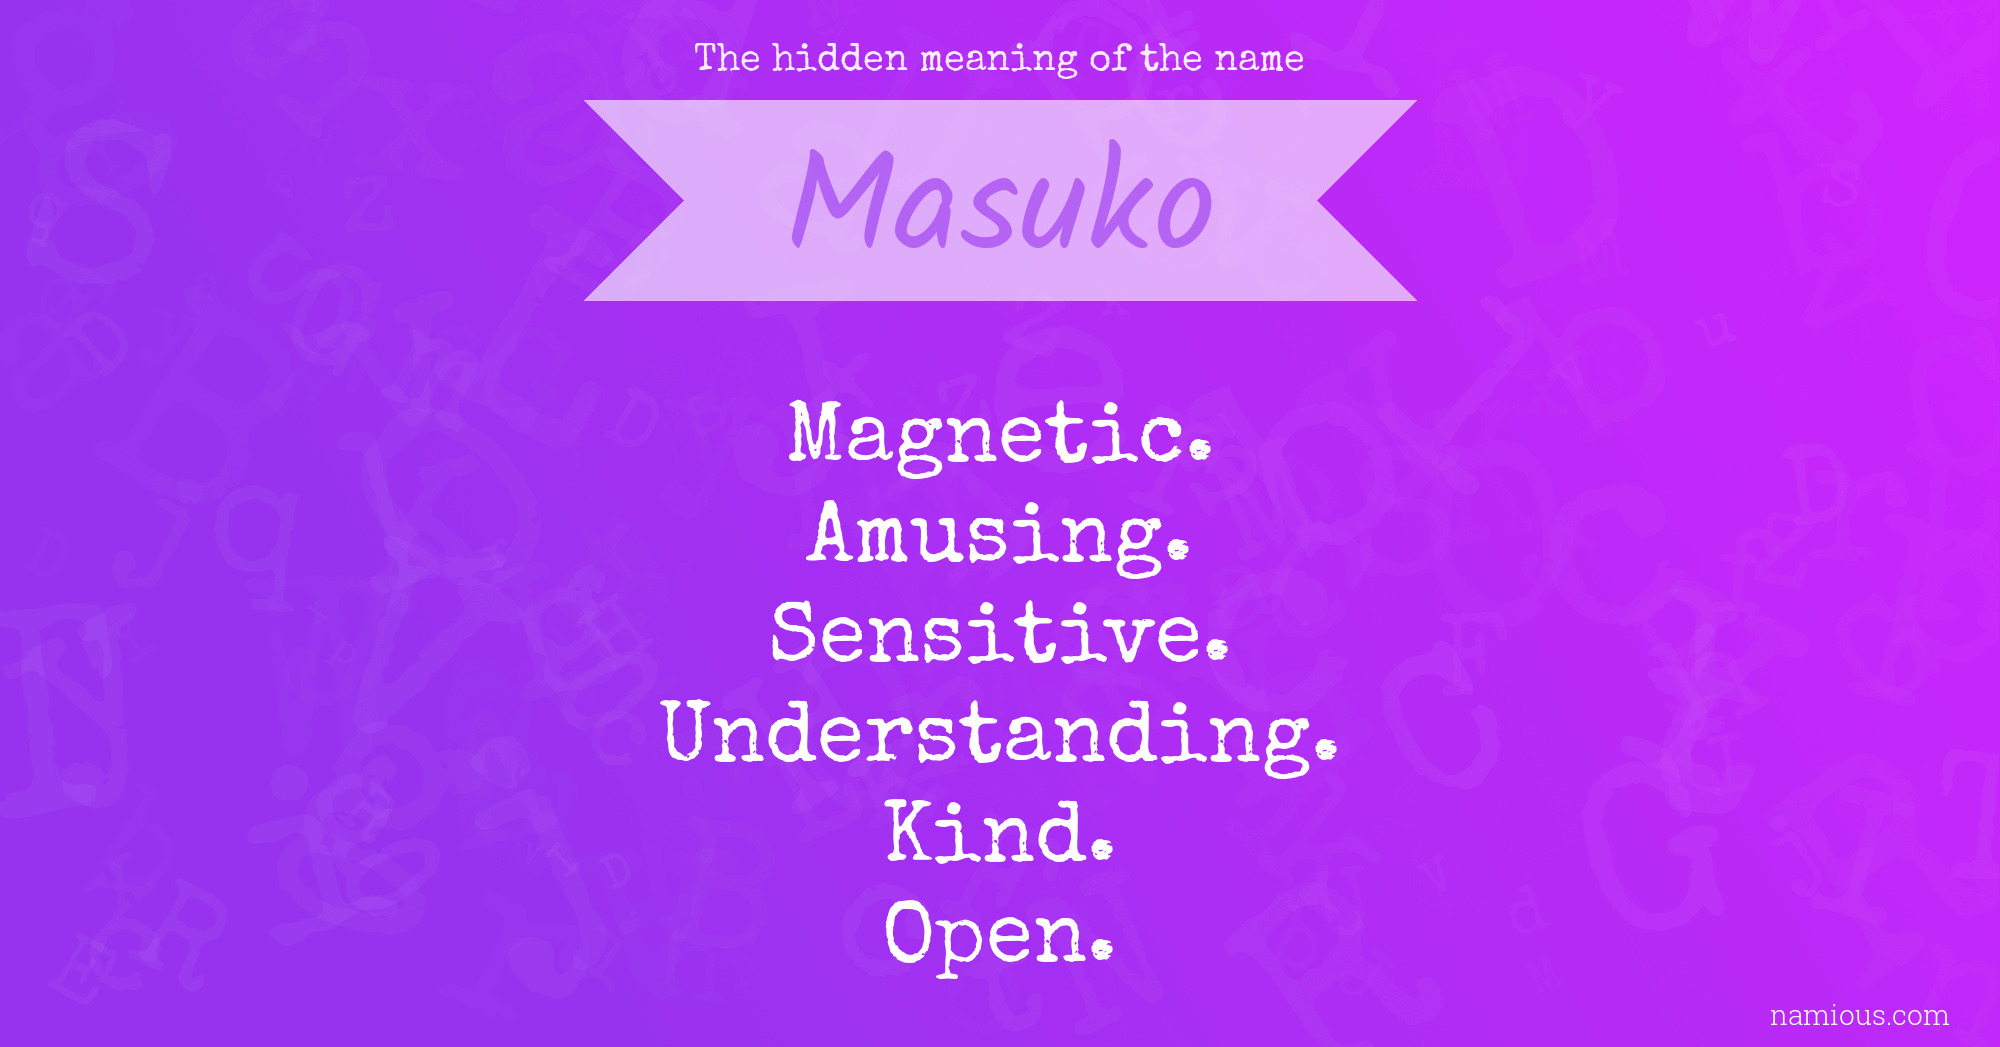 The hidden meaning of the name Masuko